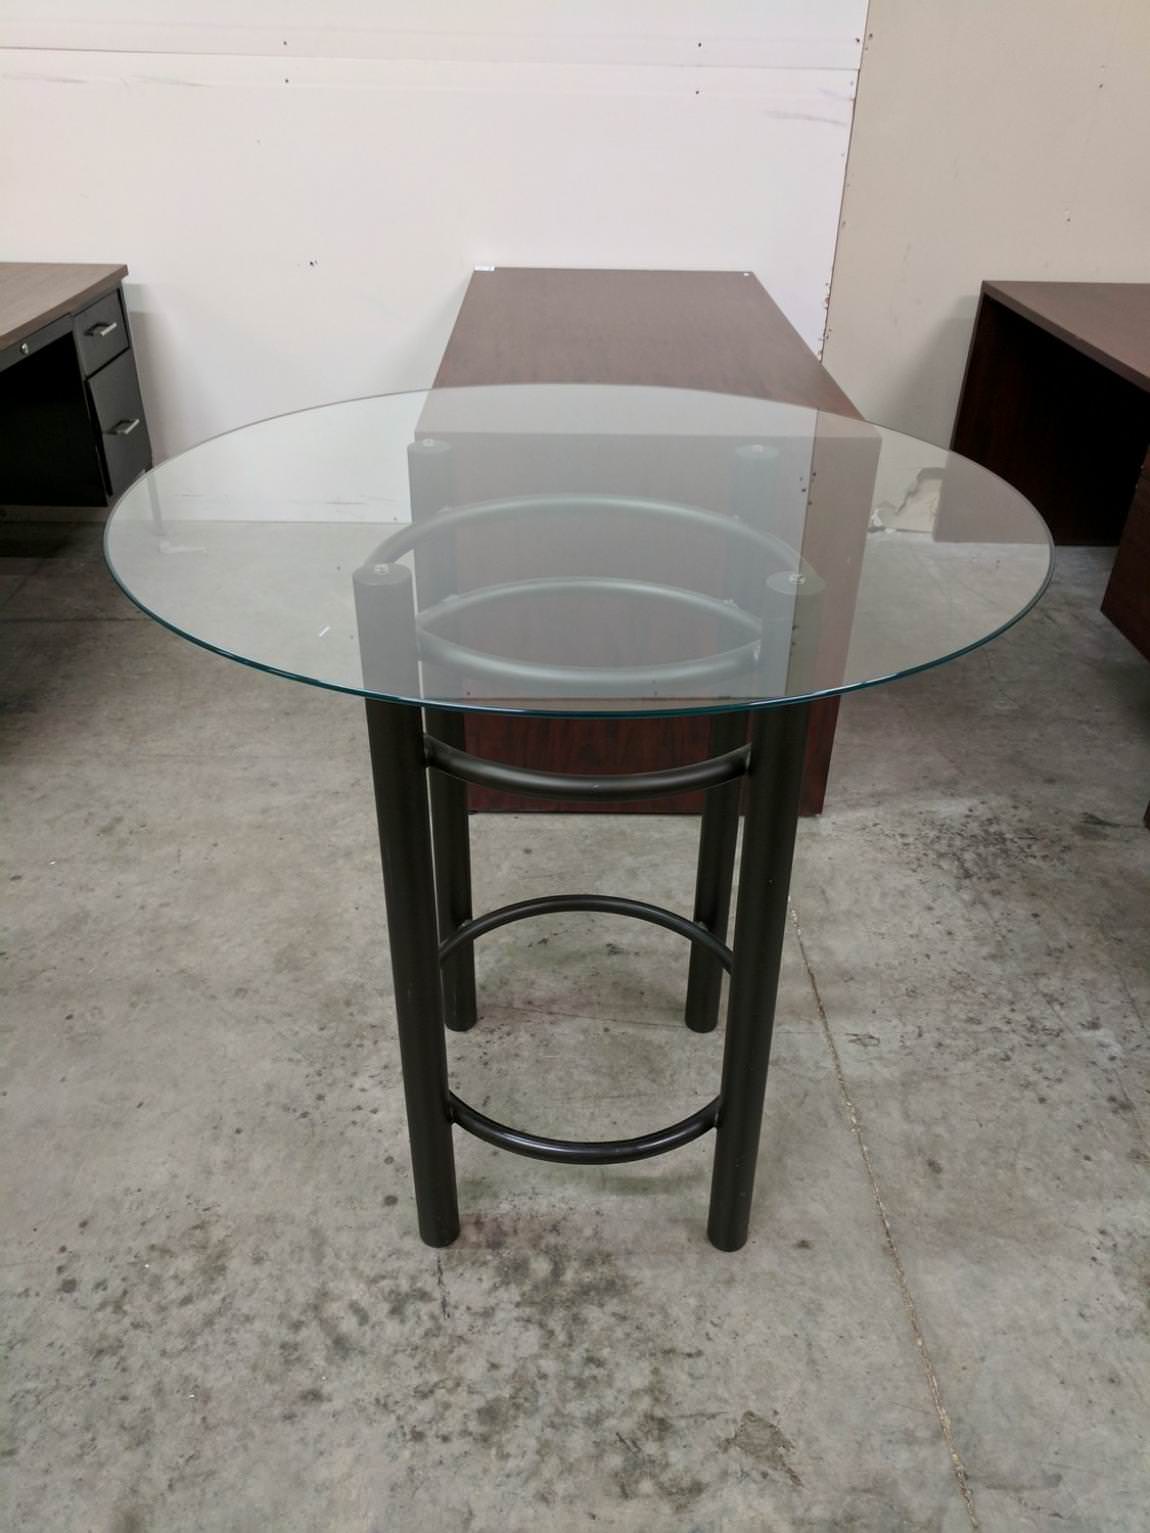 36” Round Table with Glass Top